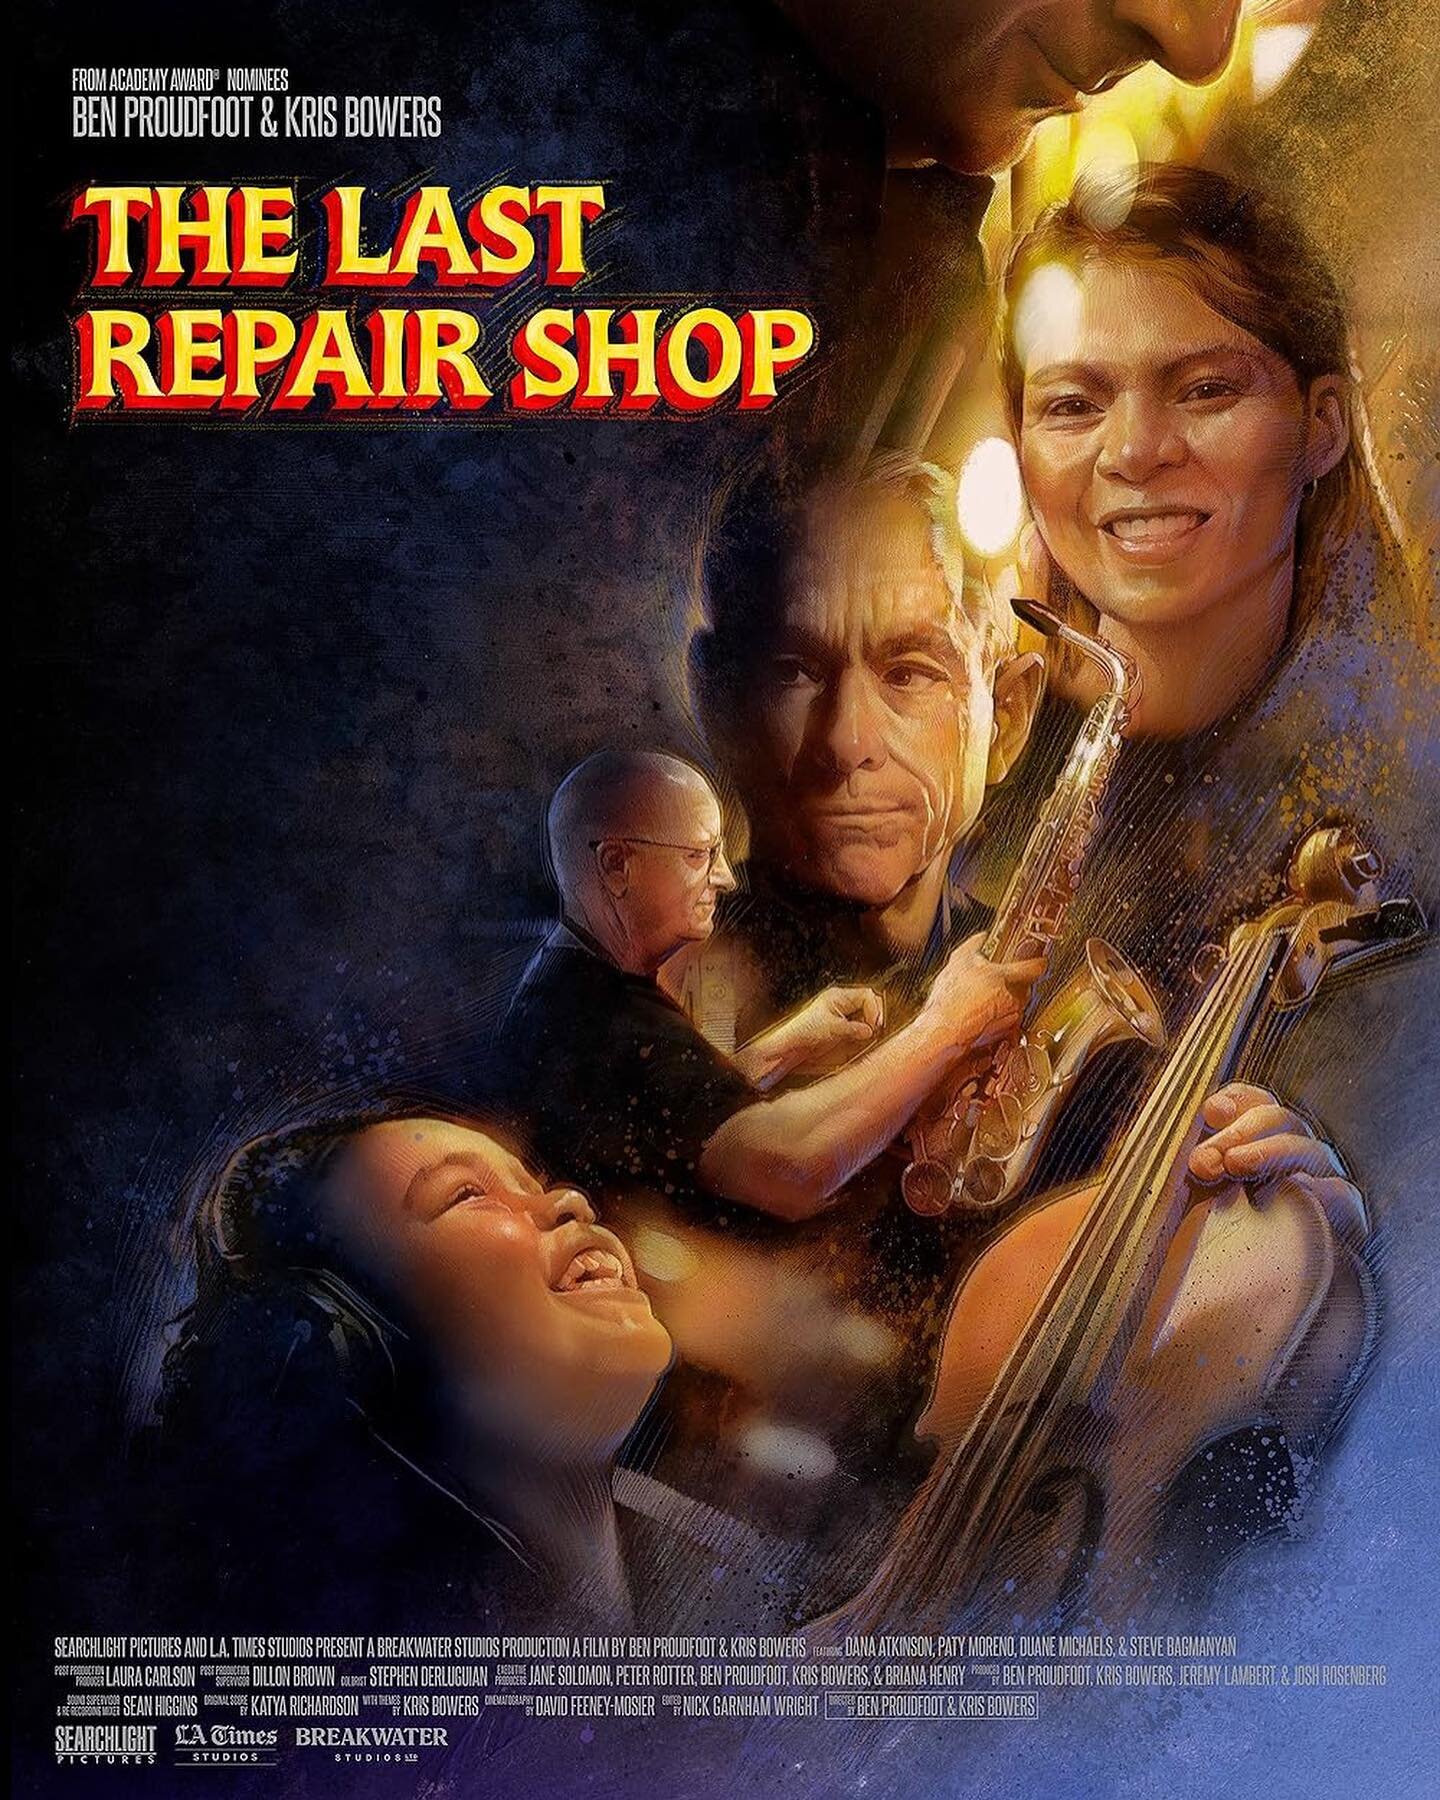 BIG news today!!! The Last Repair Shop has been nominated for an Oscar for Best Documentary Short 🎉🎉🎉

Directed by Ben Proudfoot and Kris Bowers, and Executive Produced by the founder of Encompass, Peter Rotter, this film is stealing the hearts of